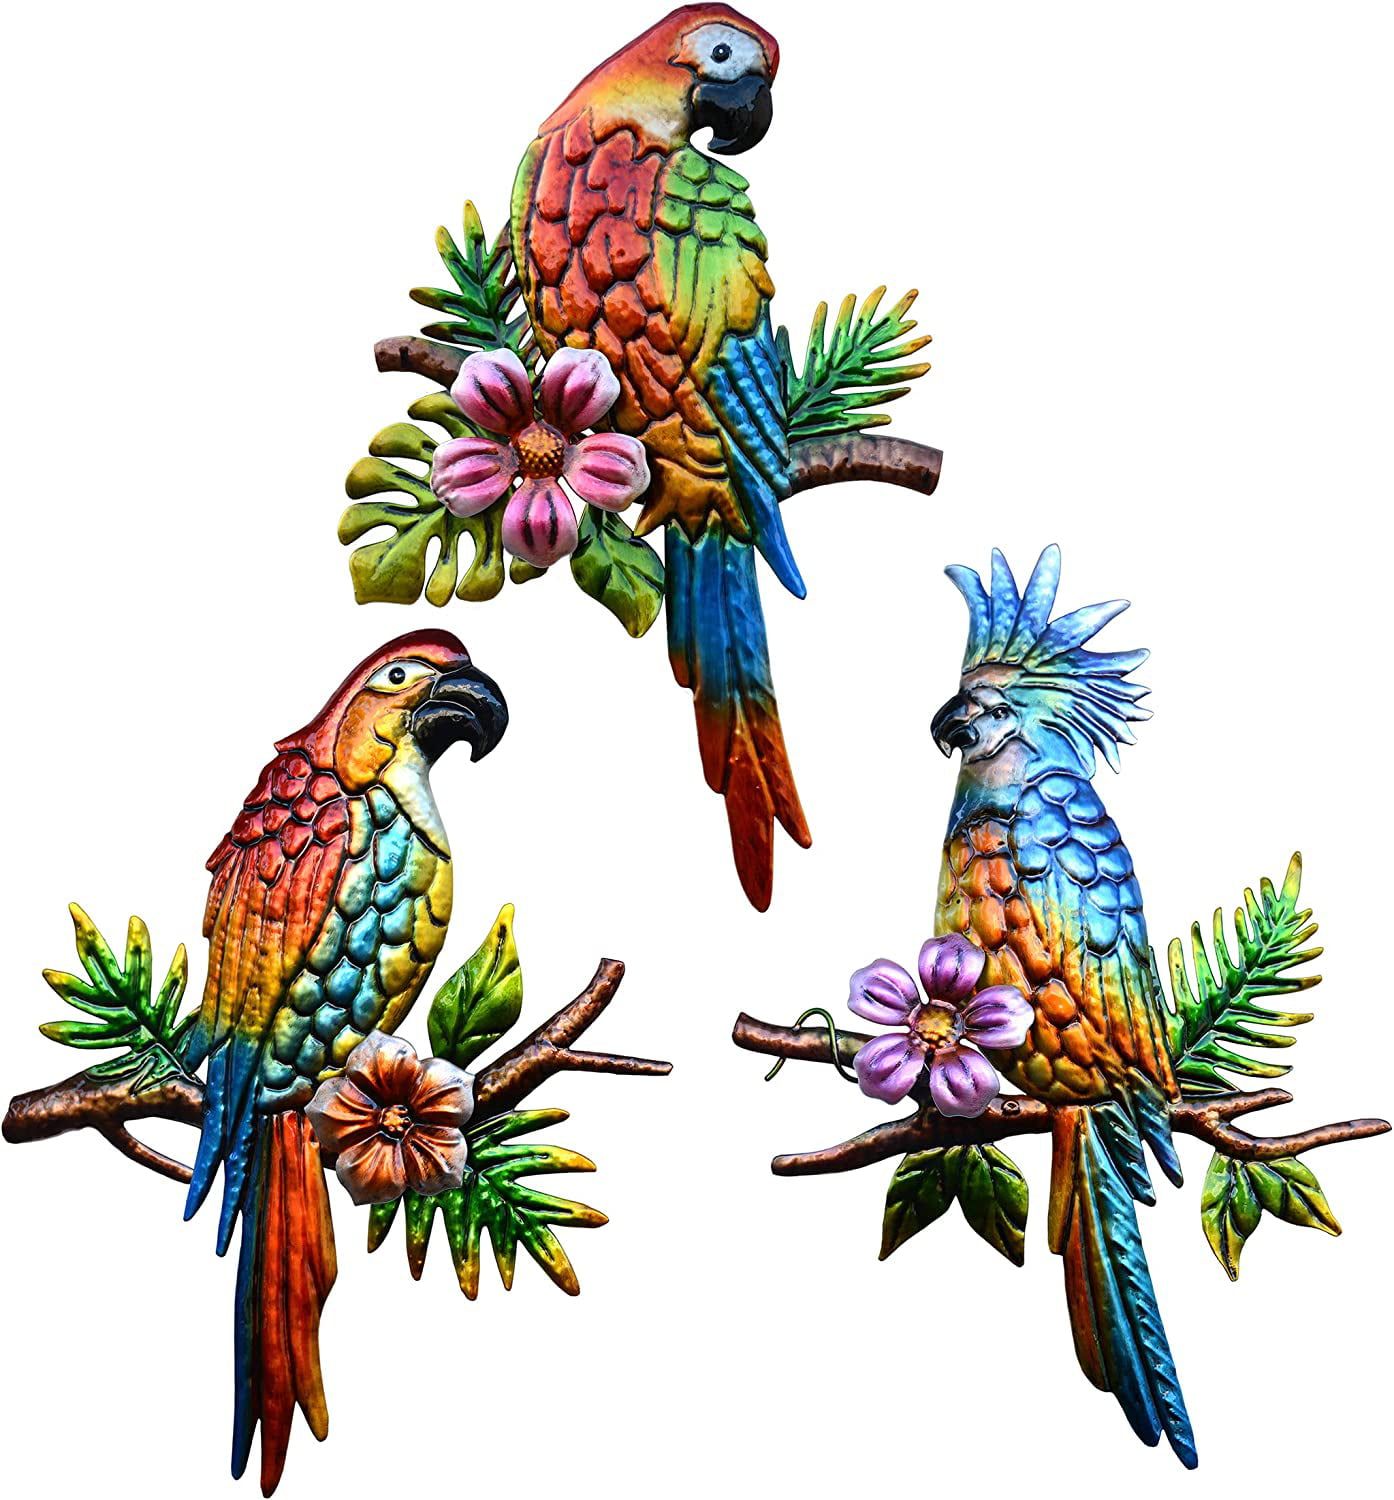 J Fly Parrot Tropical Wall Art Decor Metal Bird Wall Decor Outdoor  Decorations For Patio Wall Fence Garden Home Kitchen Balcony Tropical Bird  Macaw Wall Sculpture Hanging For Indoor Outdoor – Walmart Within Recent Bird Macaw Wall Sculpture (Gallery 1 of 20)